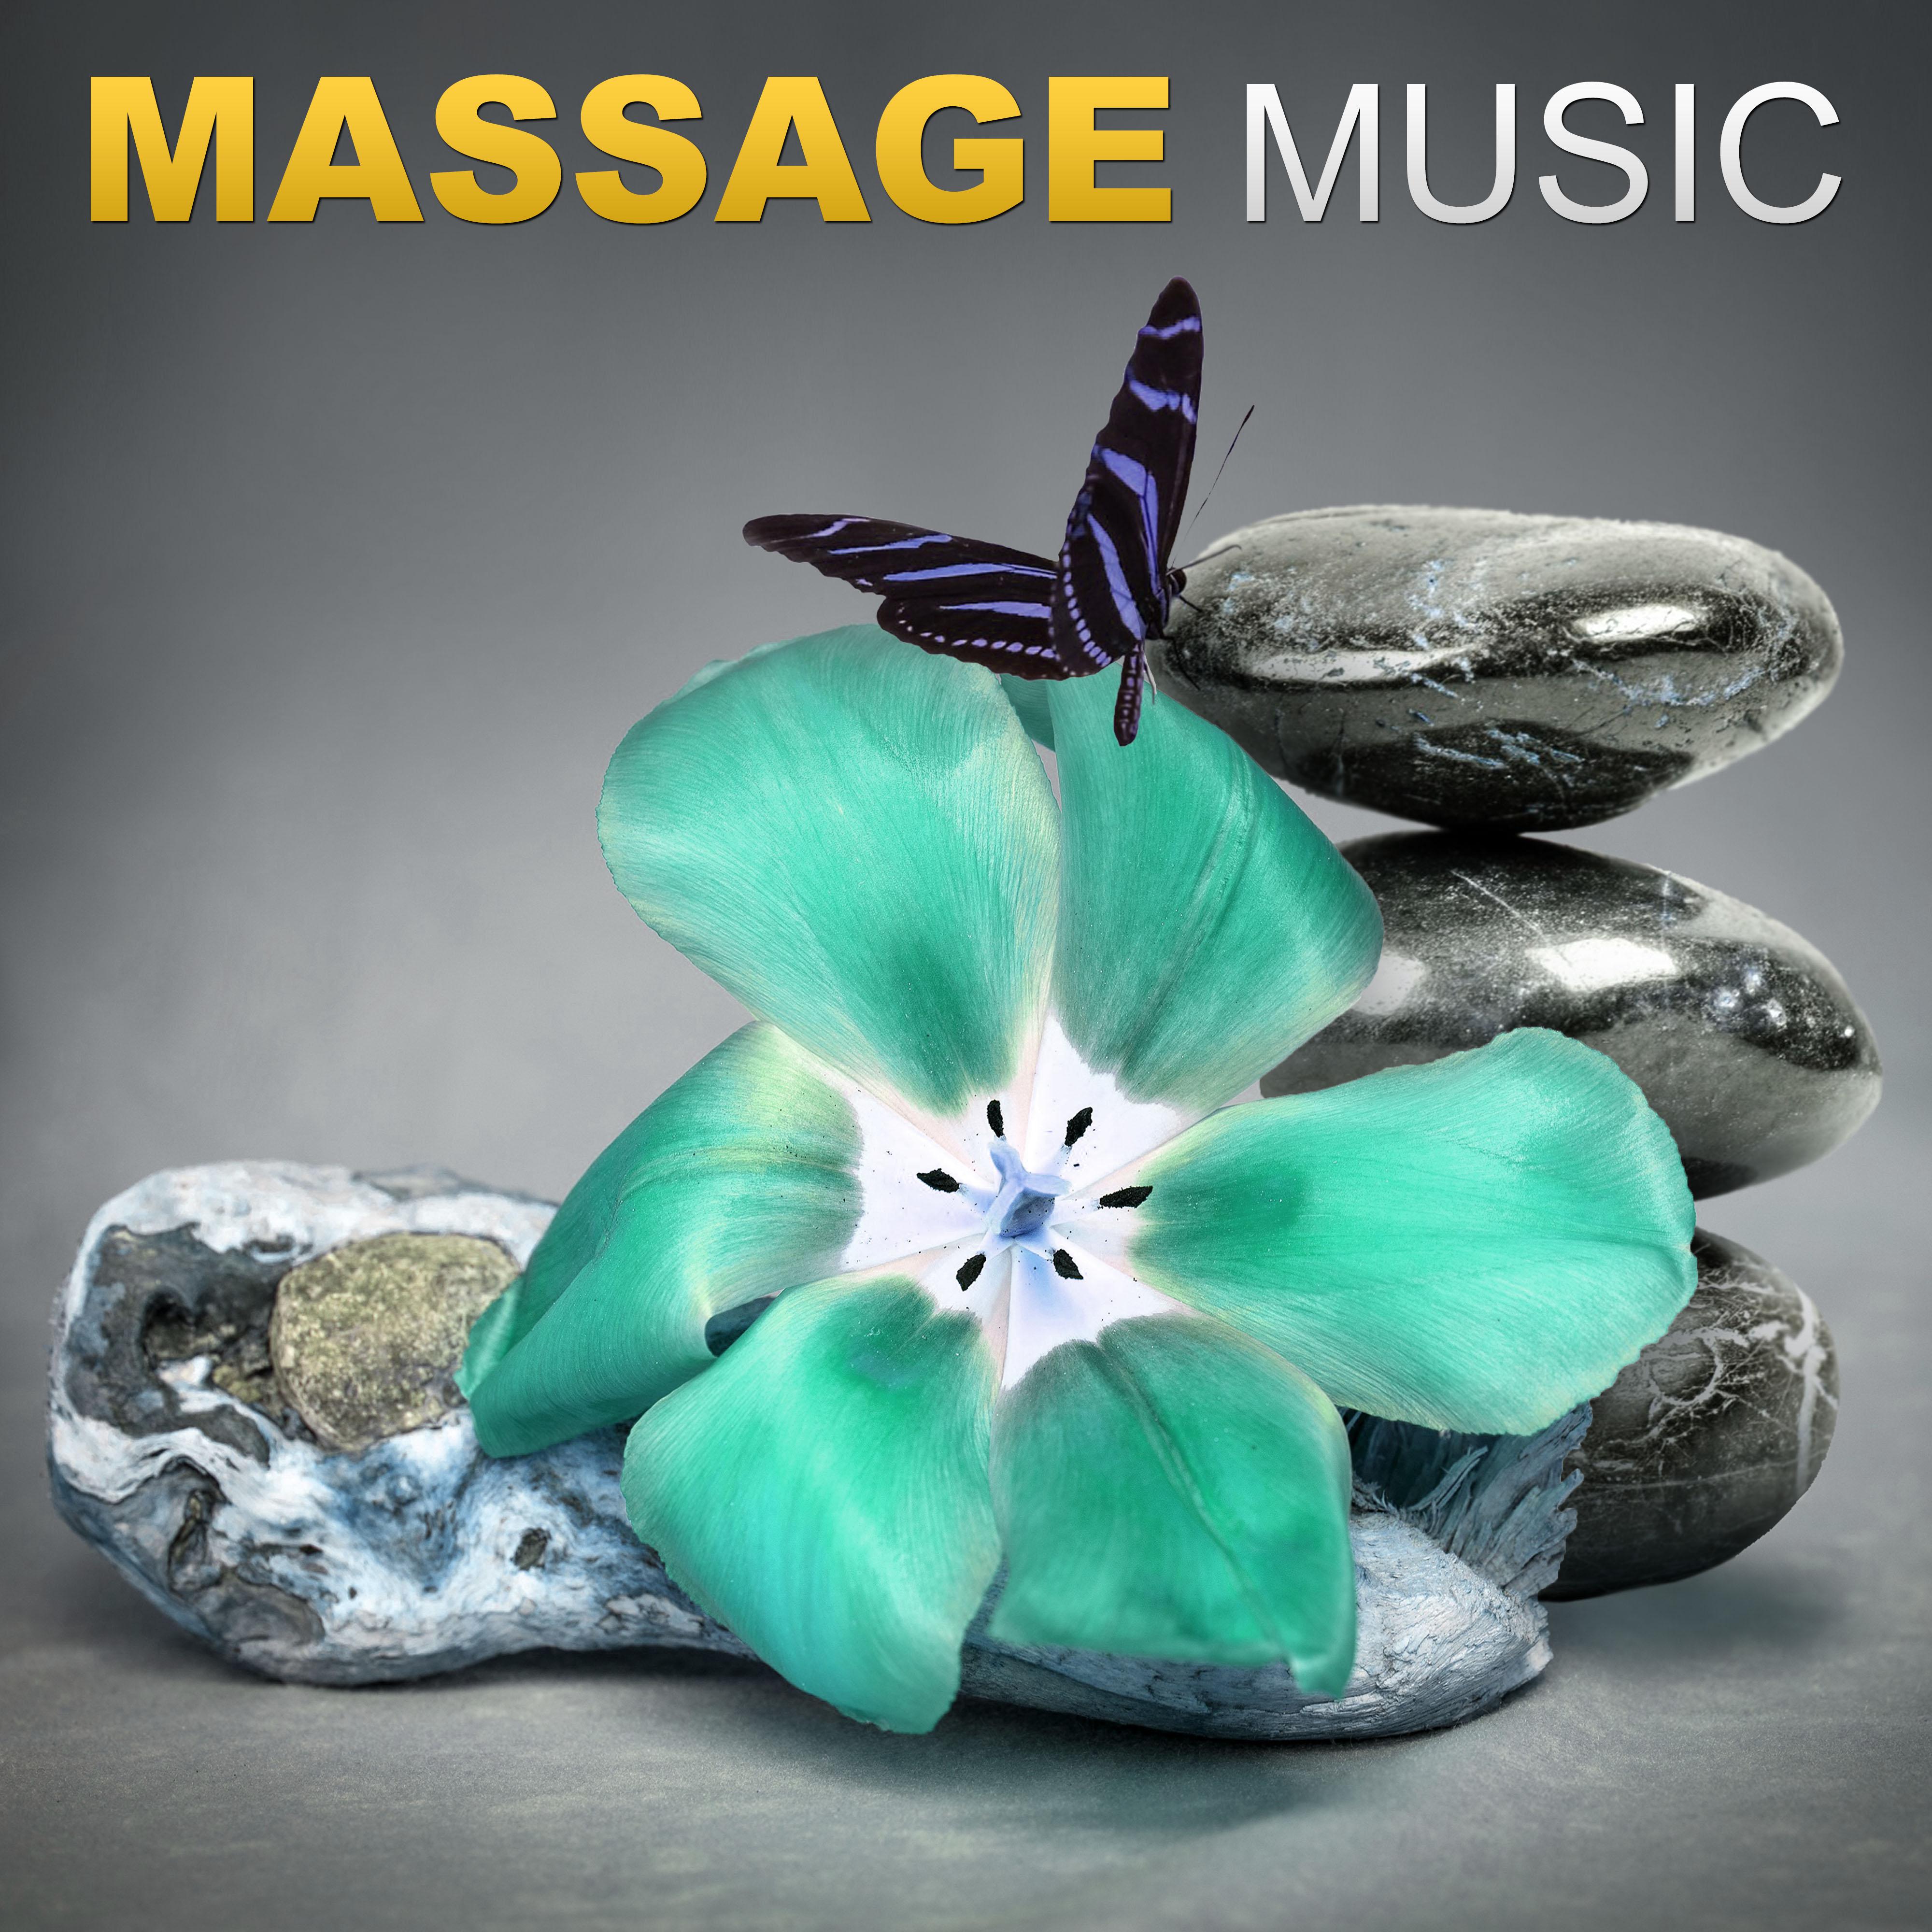 Massage Music  New Age Spa Music, Relaxing Massage, Soft Music to Rest